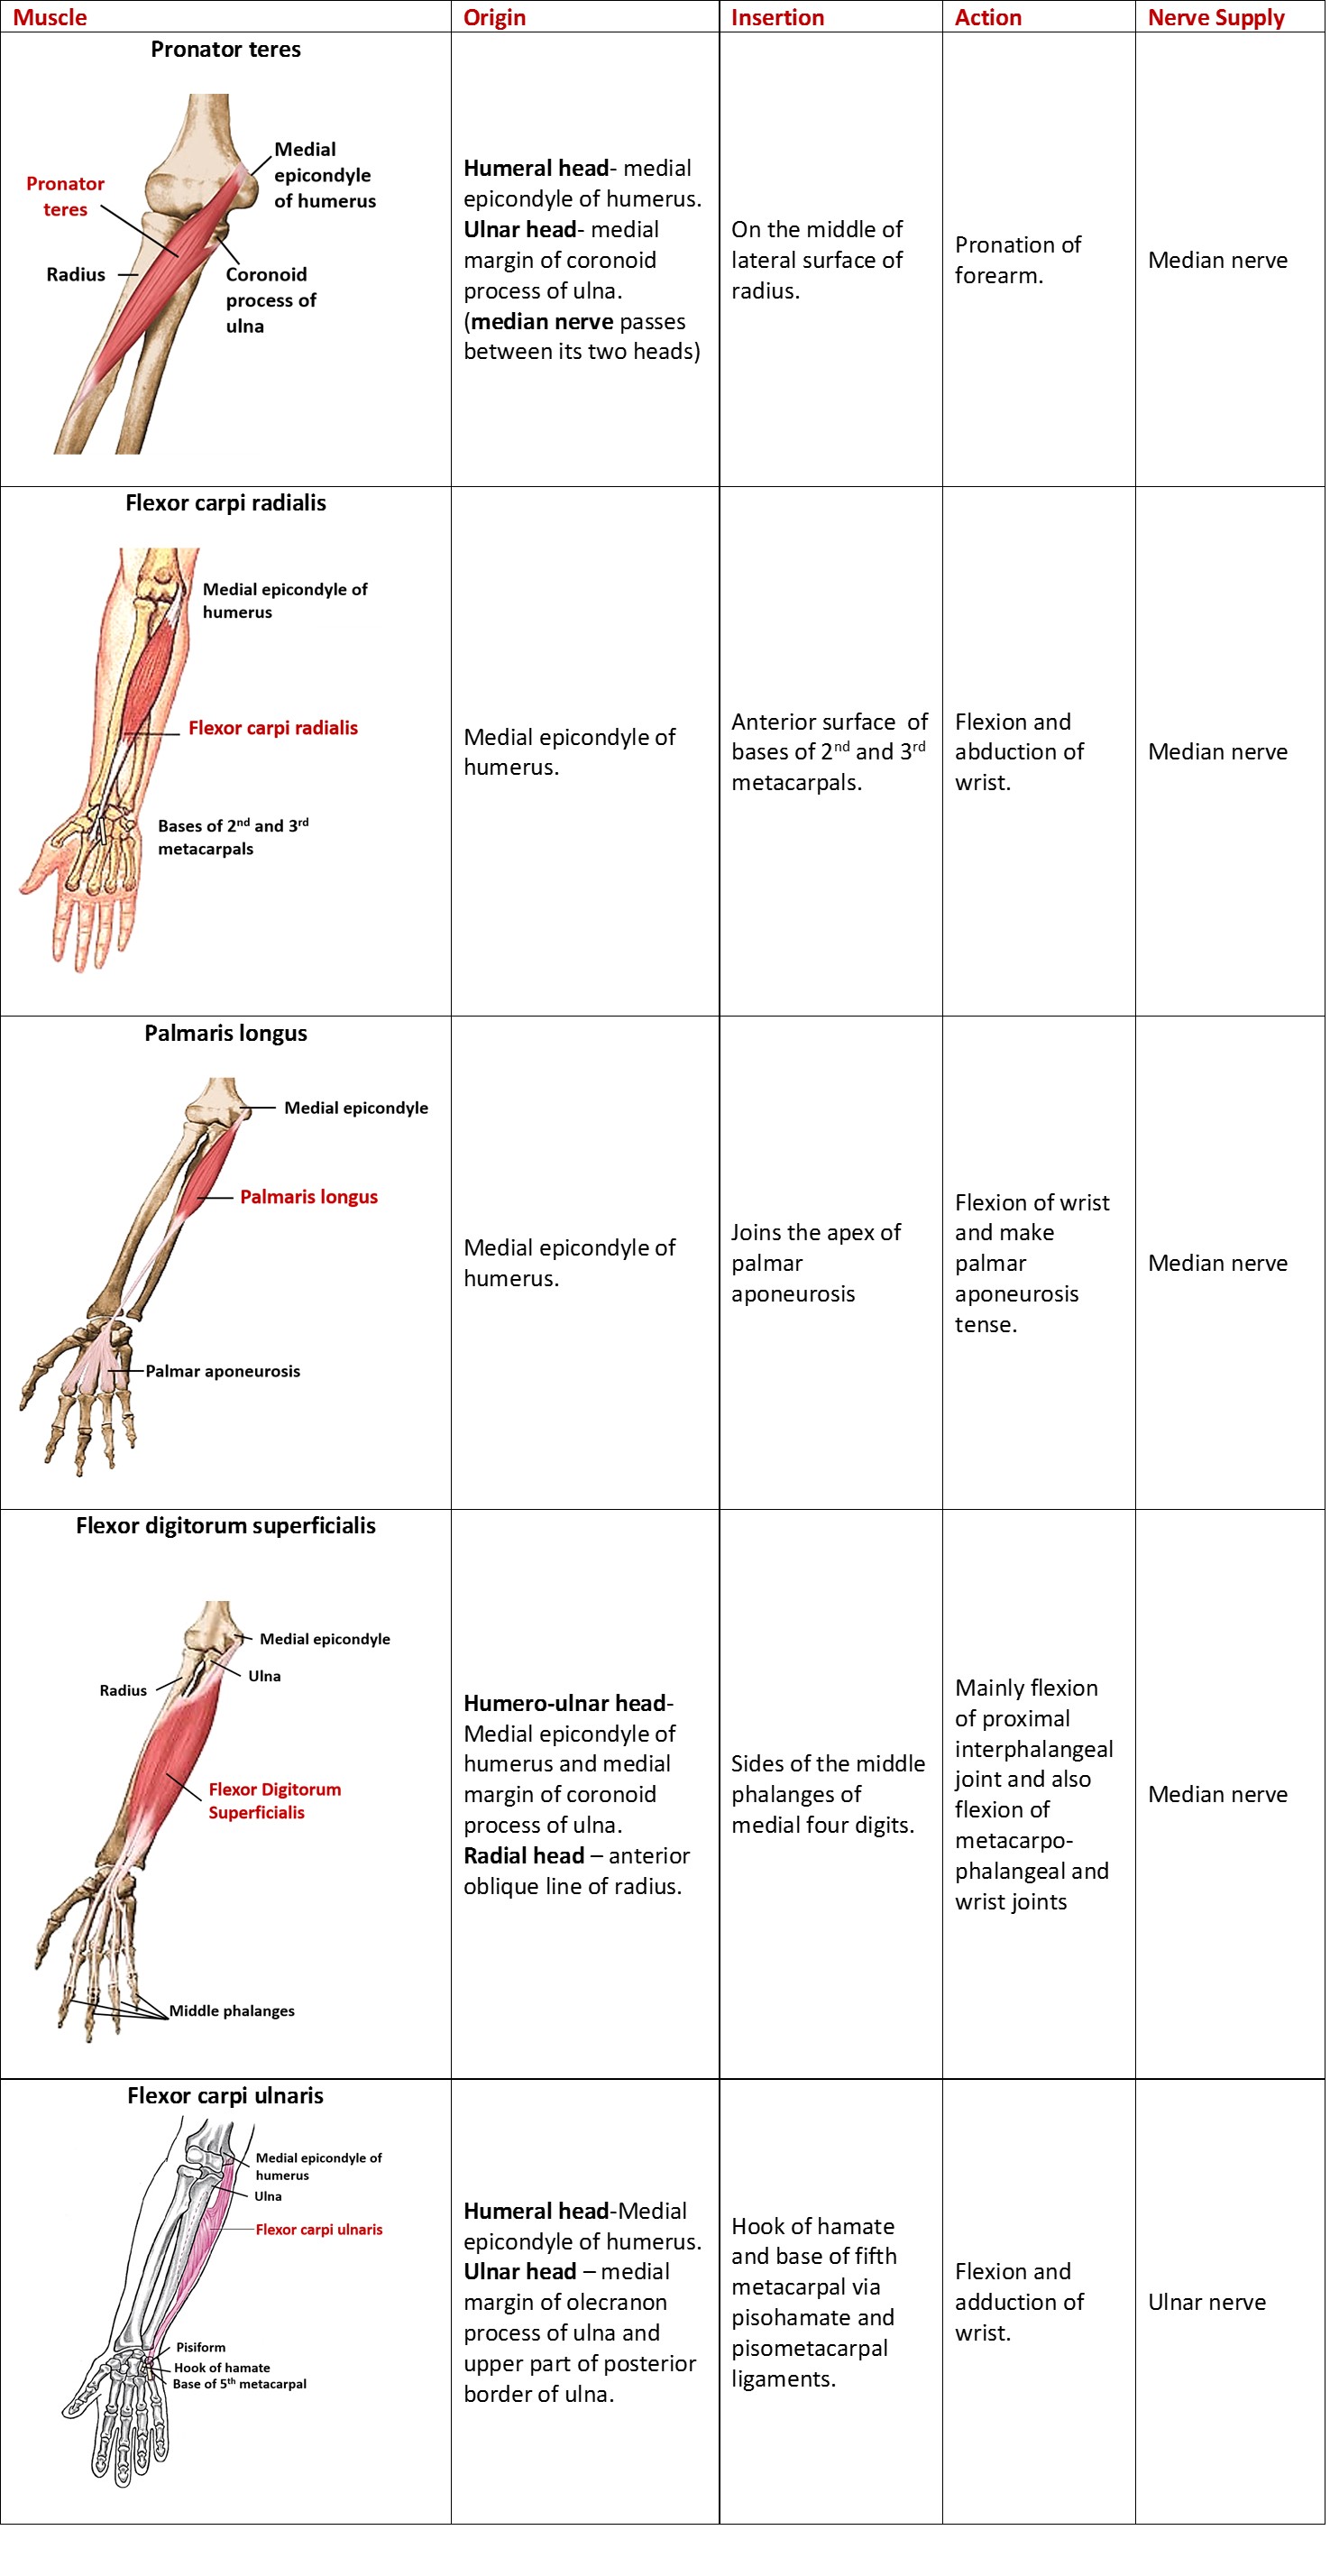 muscles of superficial compartment of forearm